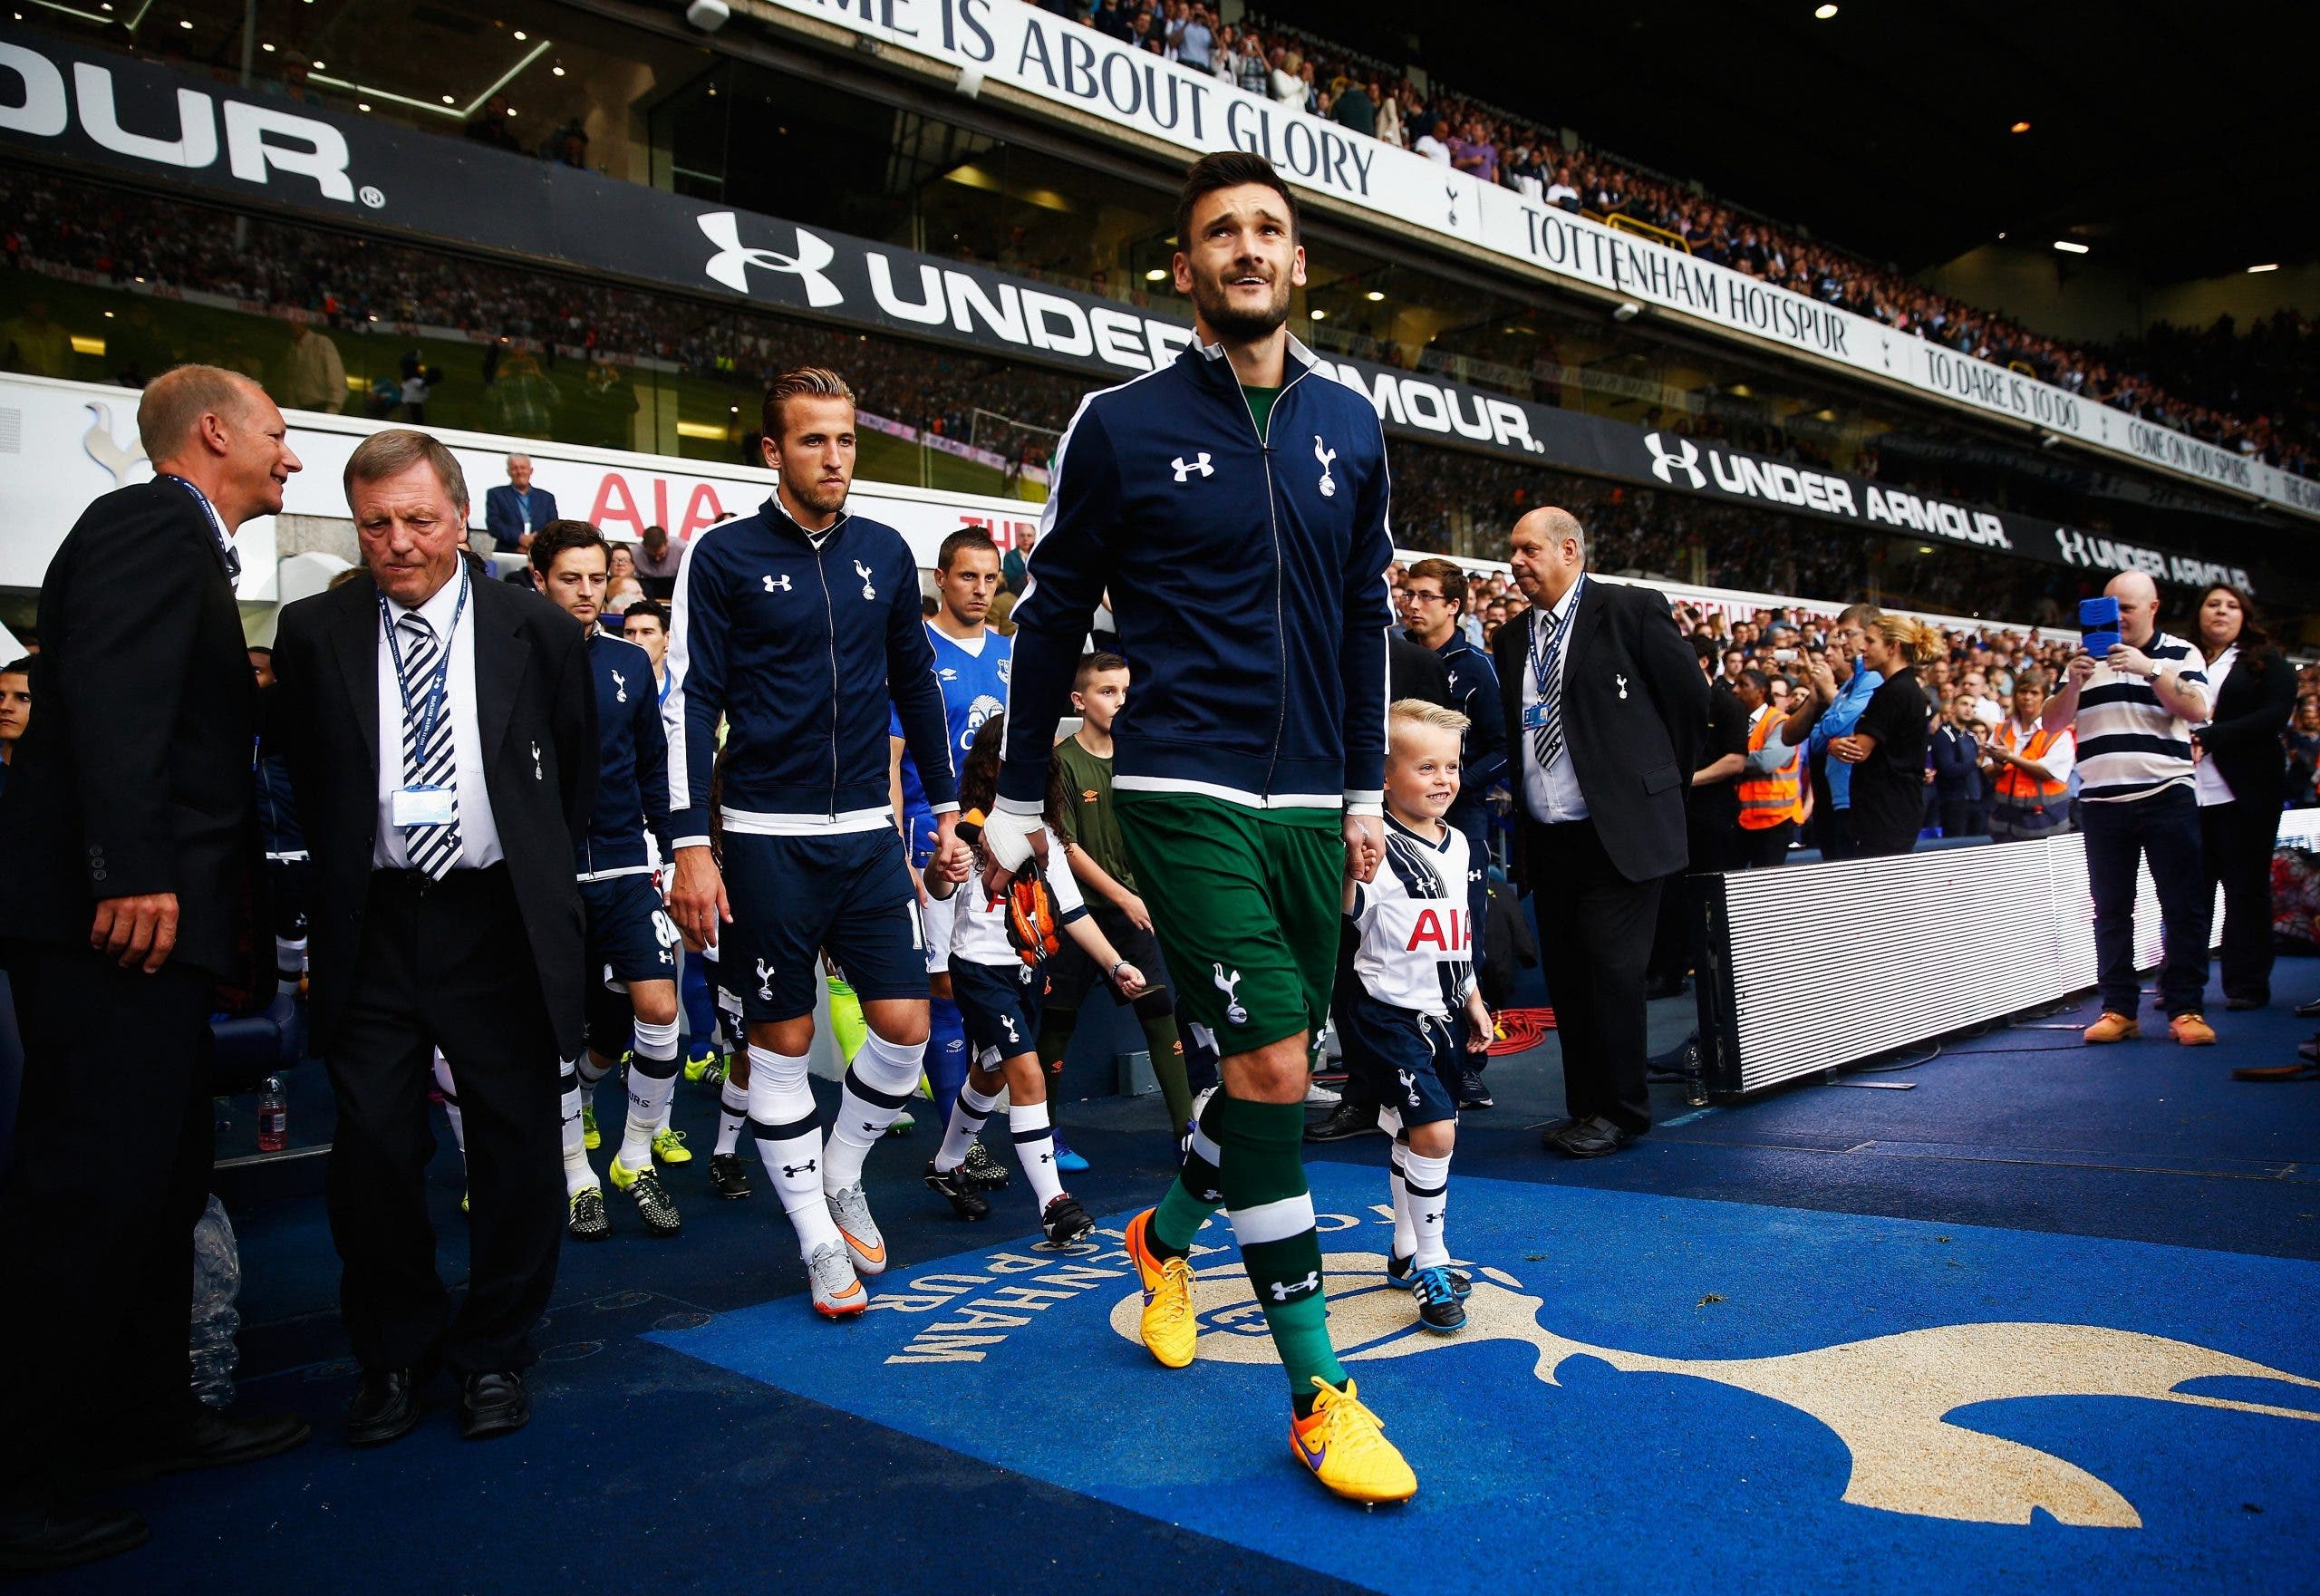 <p>LONDON, ENGLAND &#8211; AUGUST 29: Hugo Lloris of Tottenham Hotspur leads the team mates to enter the pitch prior to the Barclays Premier League match between Tottenham Hotspur and Everton at White Hart Lane on August 29, 2015 in London, England. (Photo by Julian Finney/Getty Images)</p>
